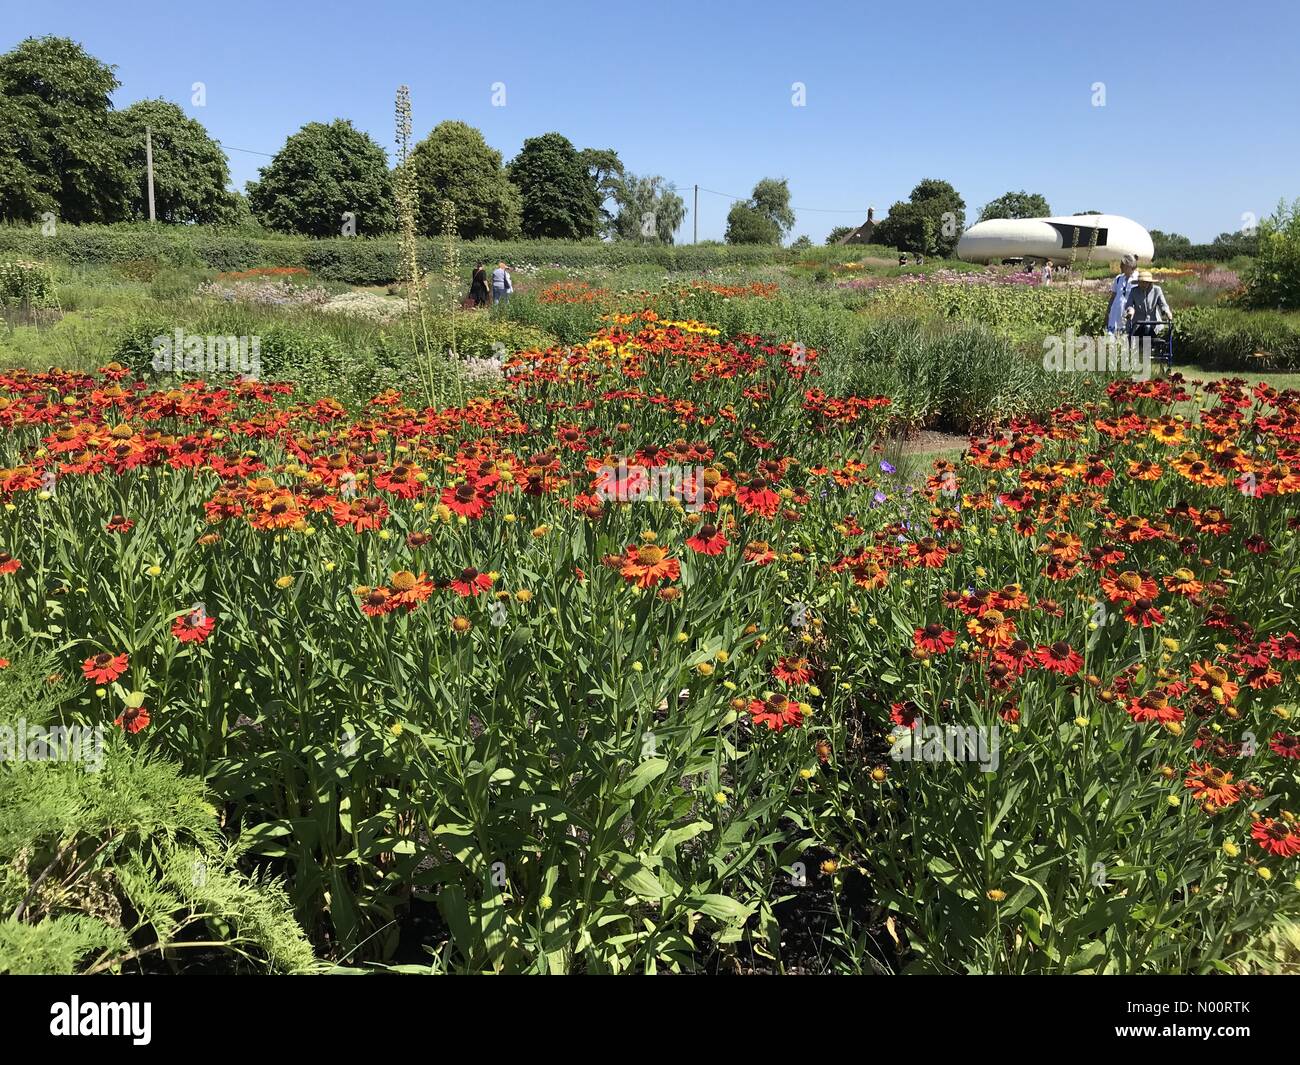 Somerset, UK, 30 June 2018. Somerset, England, 30 June 2018. UK Weather : The heatwave continues as people enjoy the vibrant colours and sizzling sunshine in Oudolf Field, designed by Piet Oudolf, Hauser & Wirth, Bruton, Somerset, England Credit: Josie Elias/StockimoNews/Alamy Live News Stock Photo